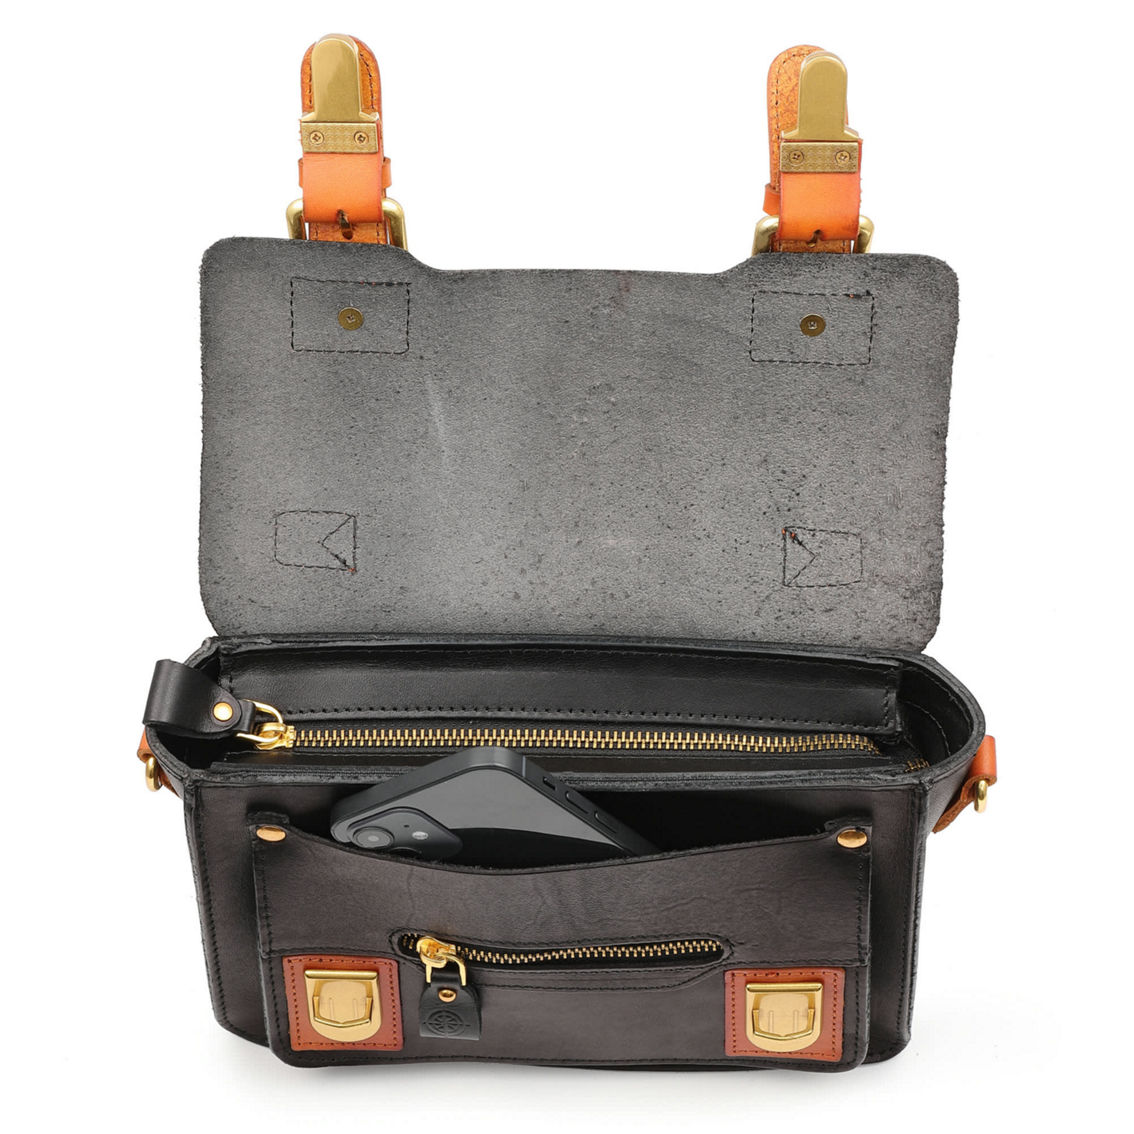 Old Trend Aster Mini Leather Satchel - Image 4 of 5